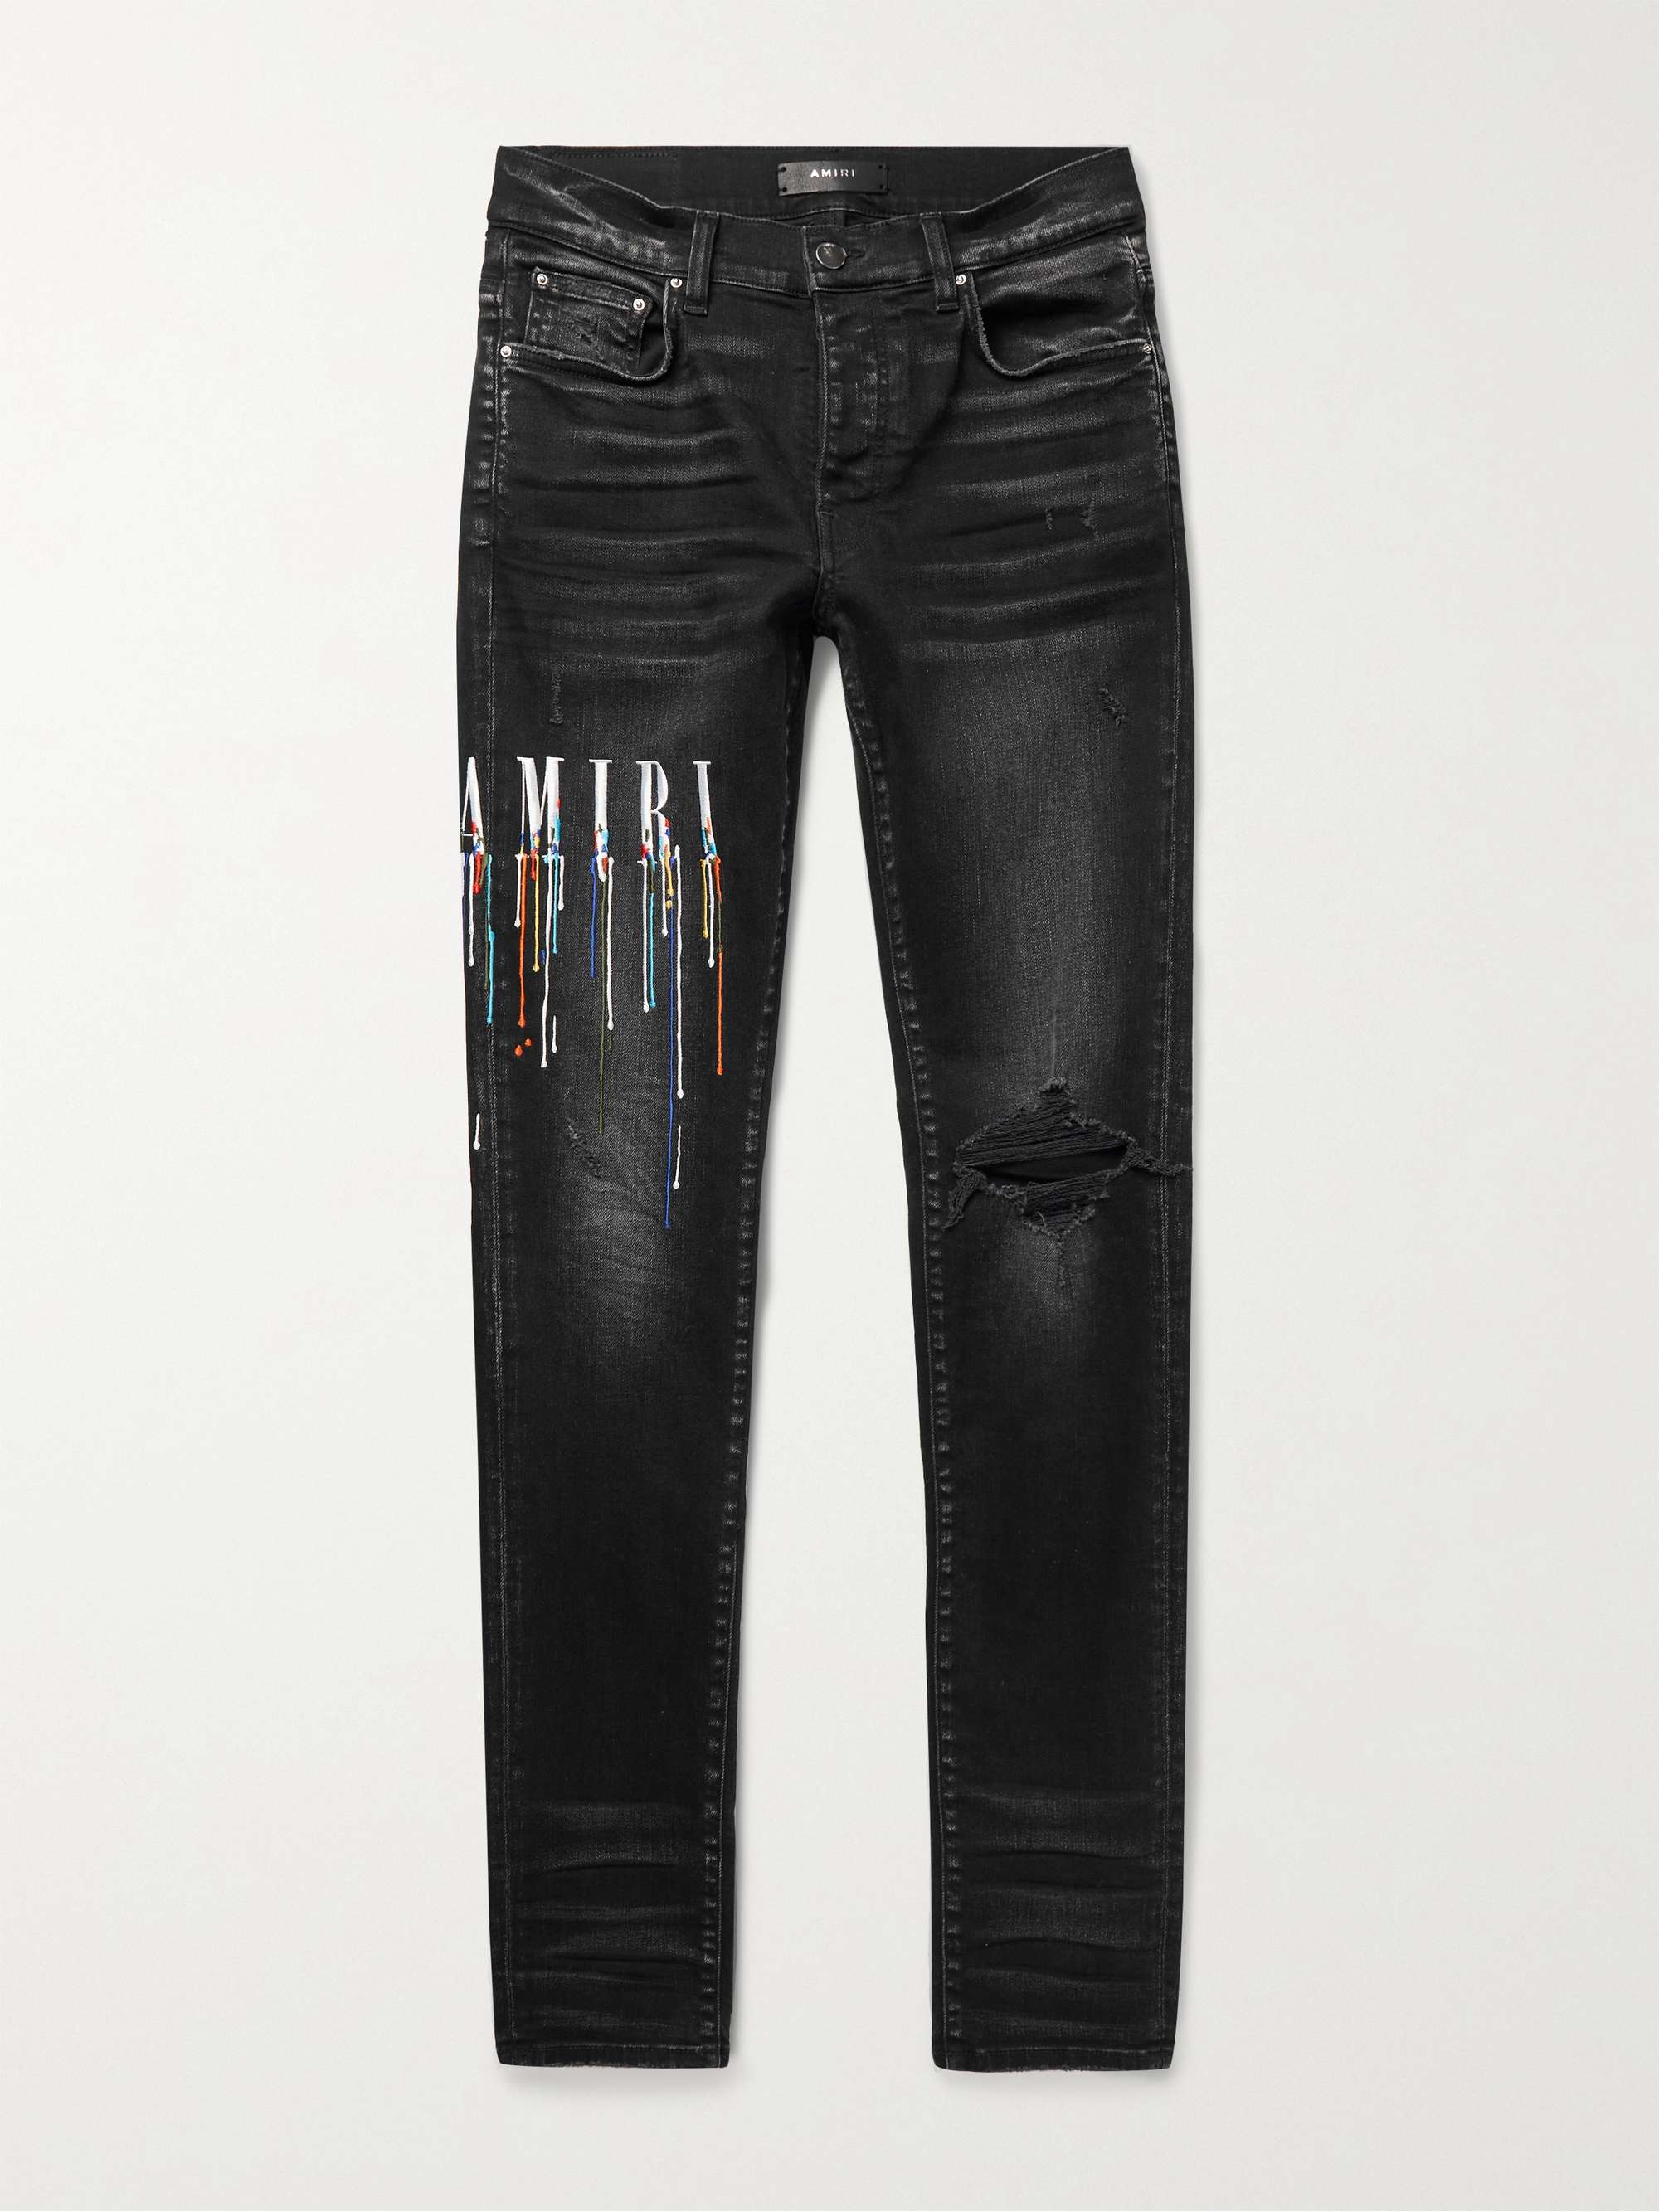 AMIRI Skinny-Fit Logo-Embroidered Distressed Jeans